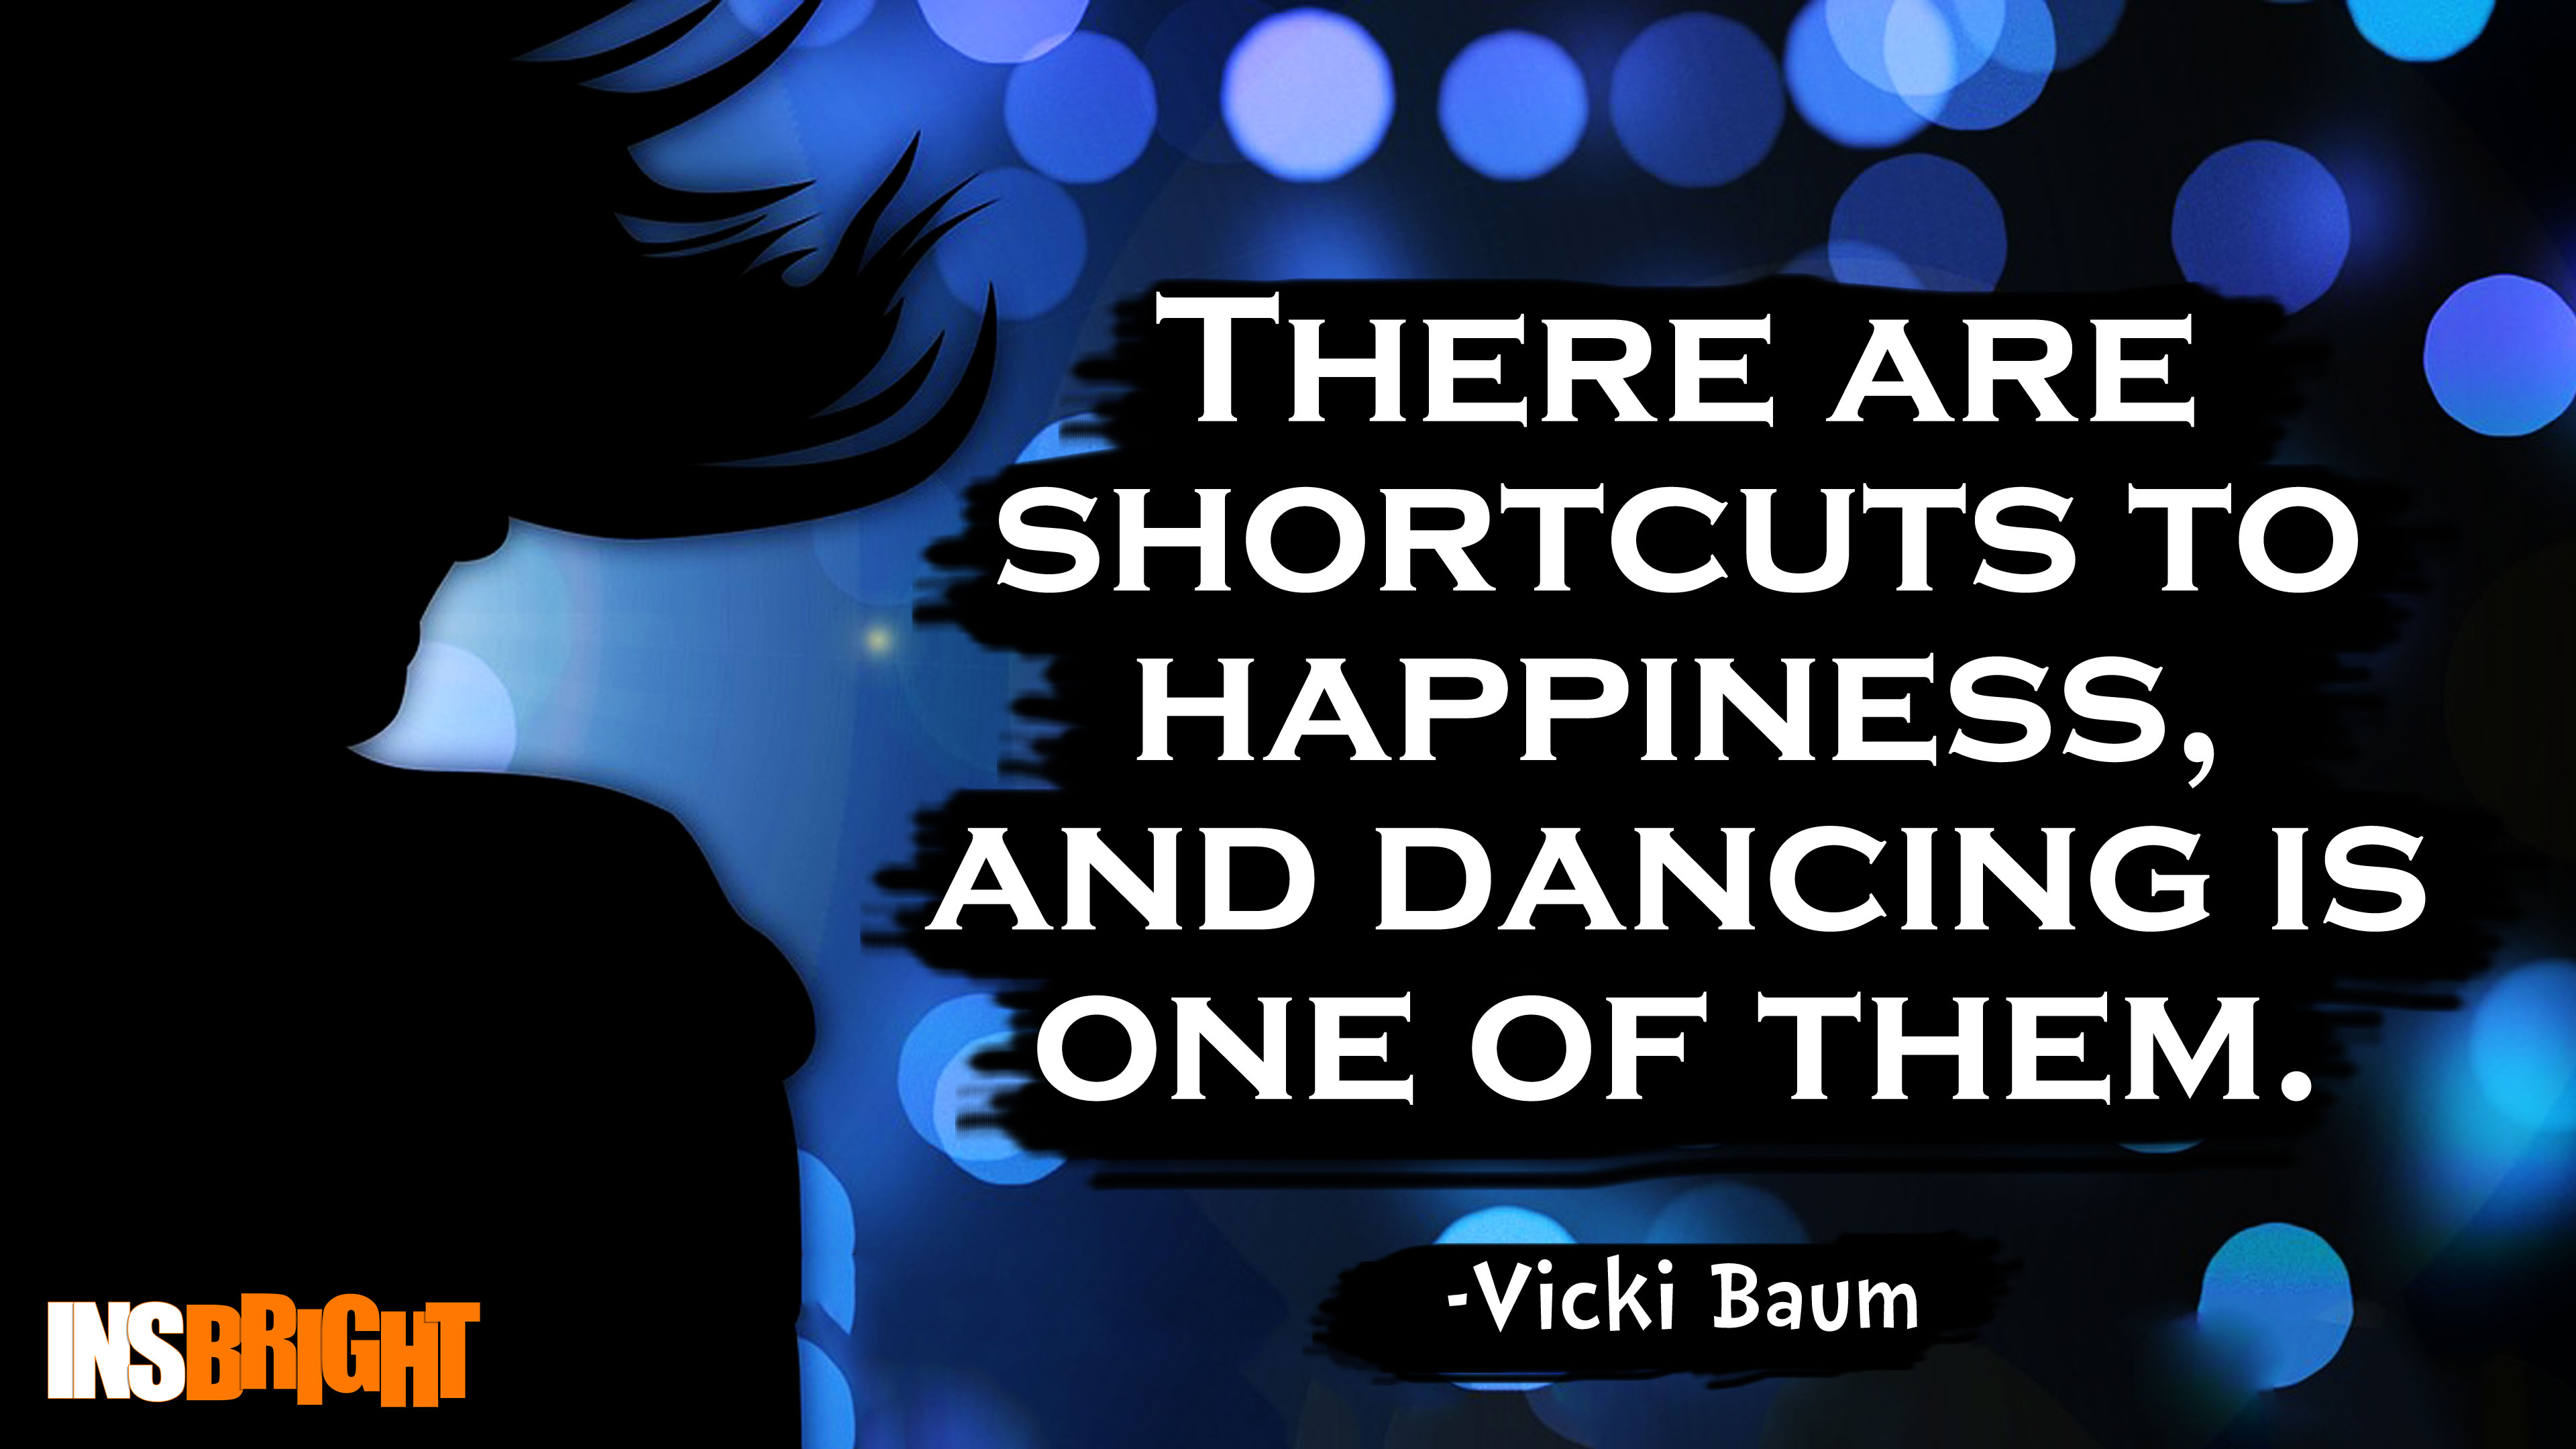 There are shortcuts to happiness, and dancing is one of them. Vicki Baum